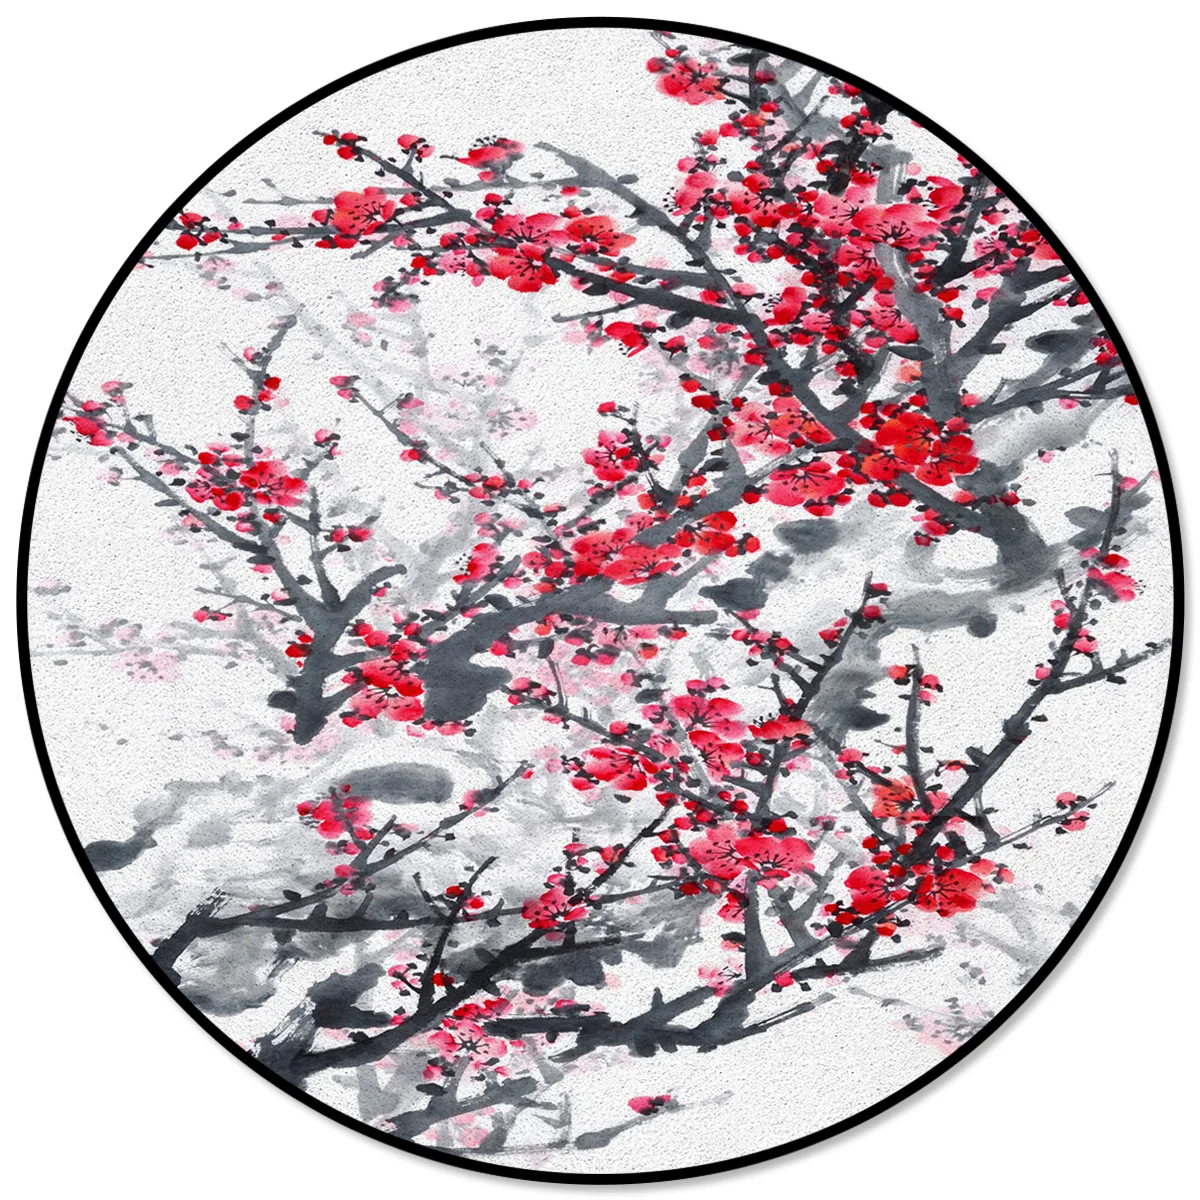 

Ink Plum Blossom Fine Art Winter Red Plum Blossom Rugs And Carpets For Home Living Room Round Rug For Children Rooms Non-slip